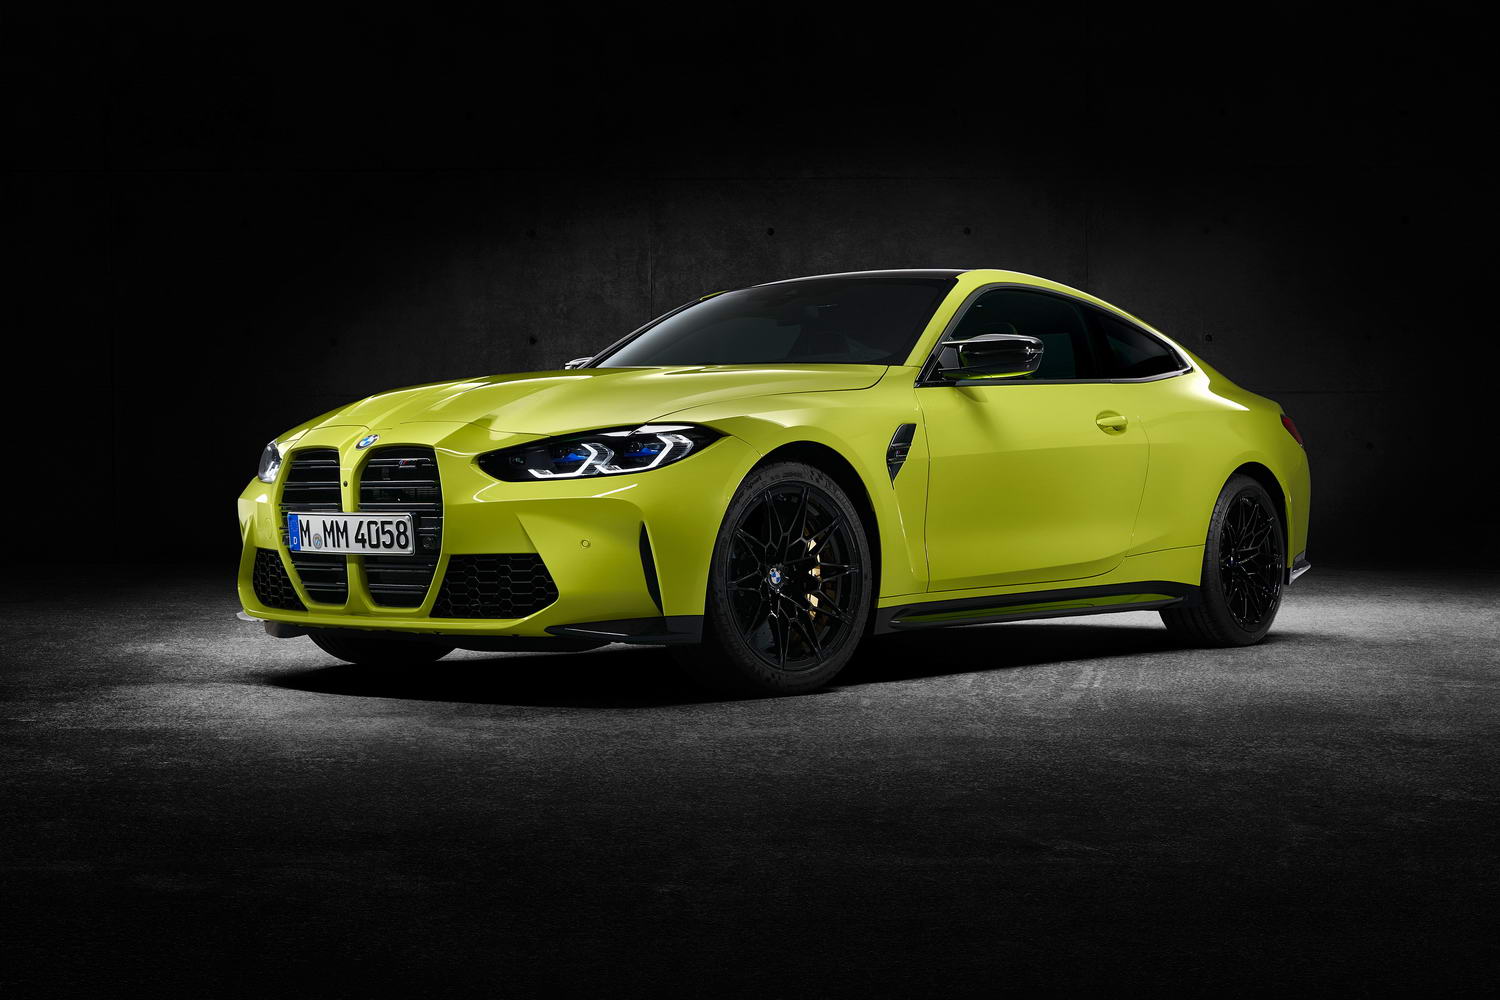 Car News | 2021 BMW M4 Coupe image gallery